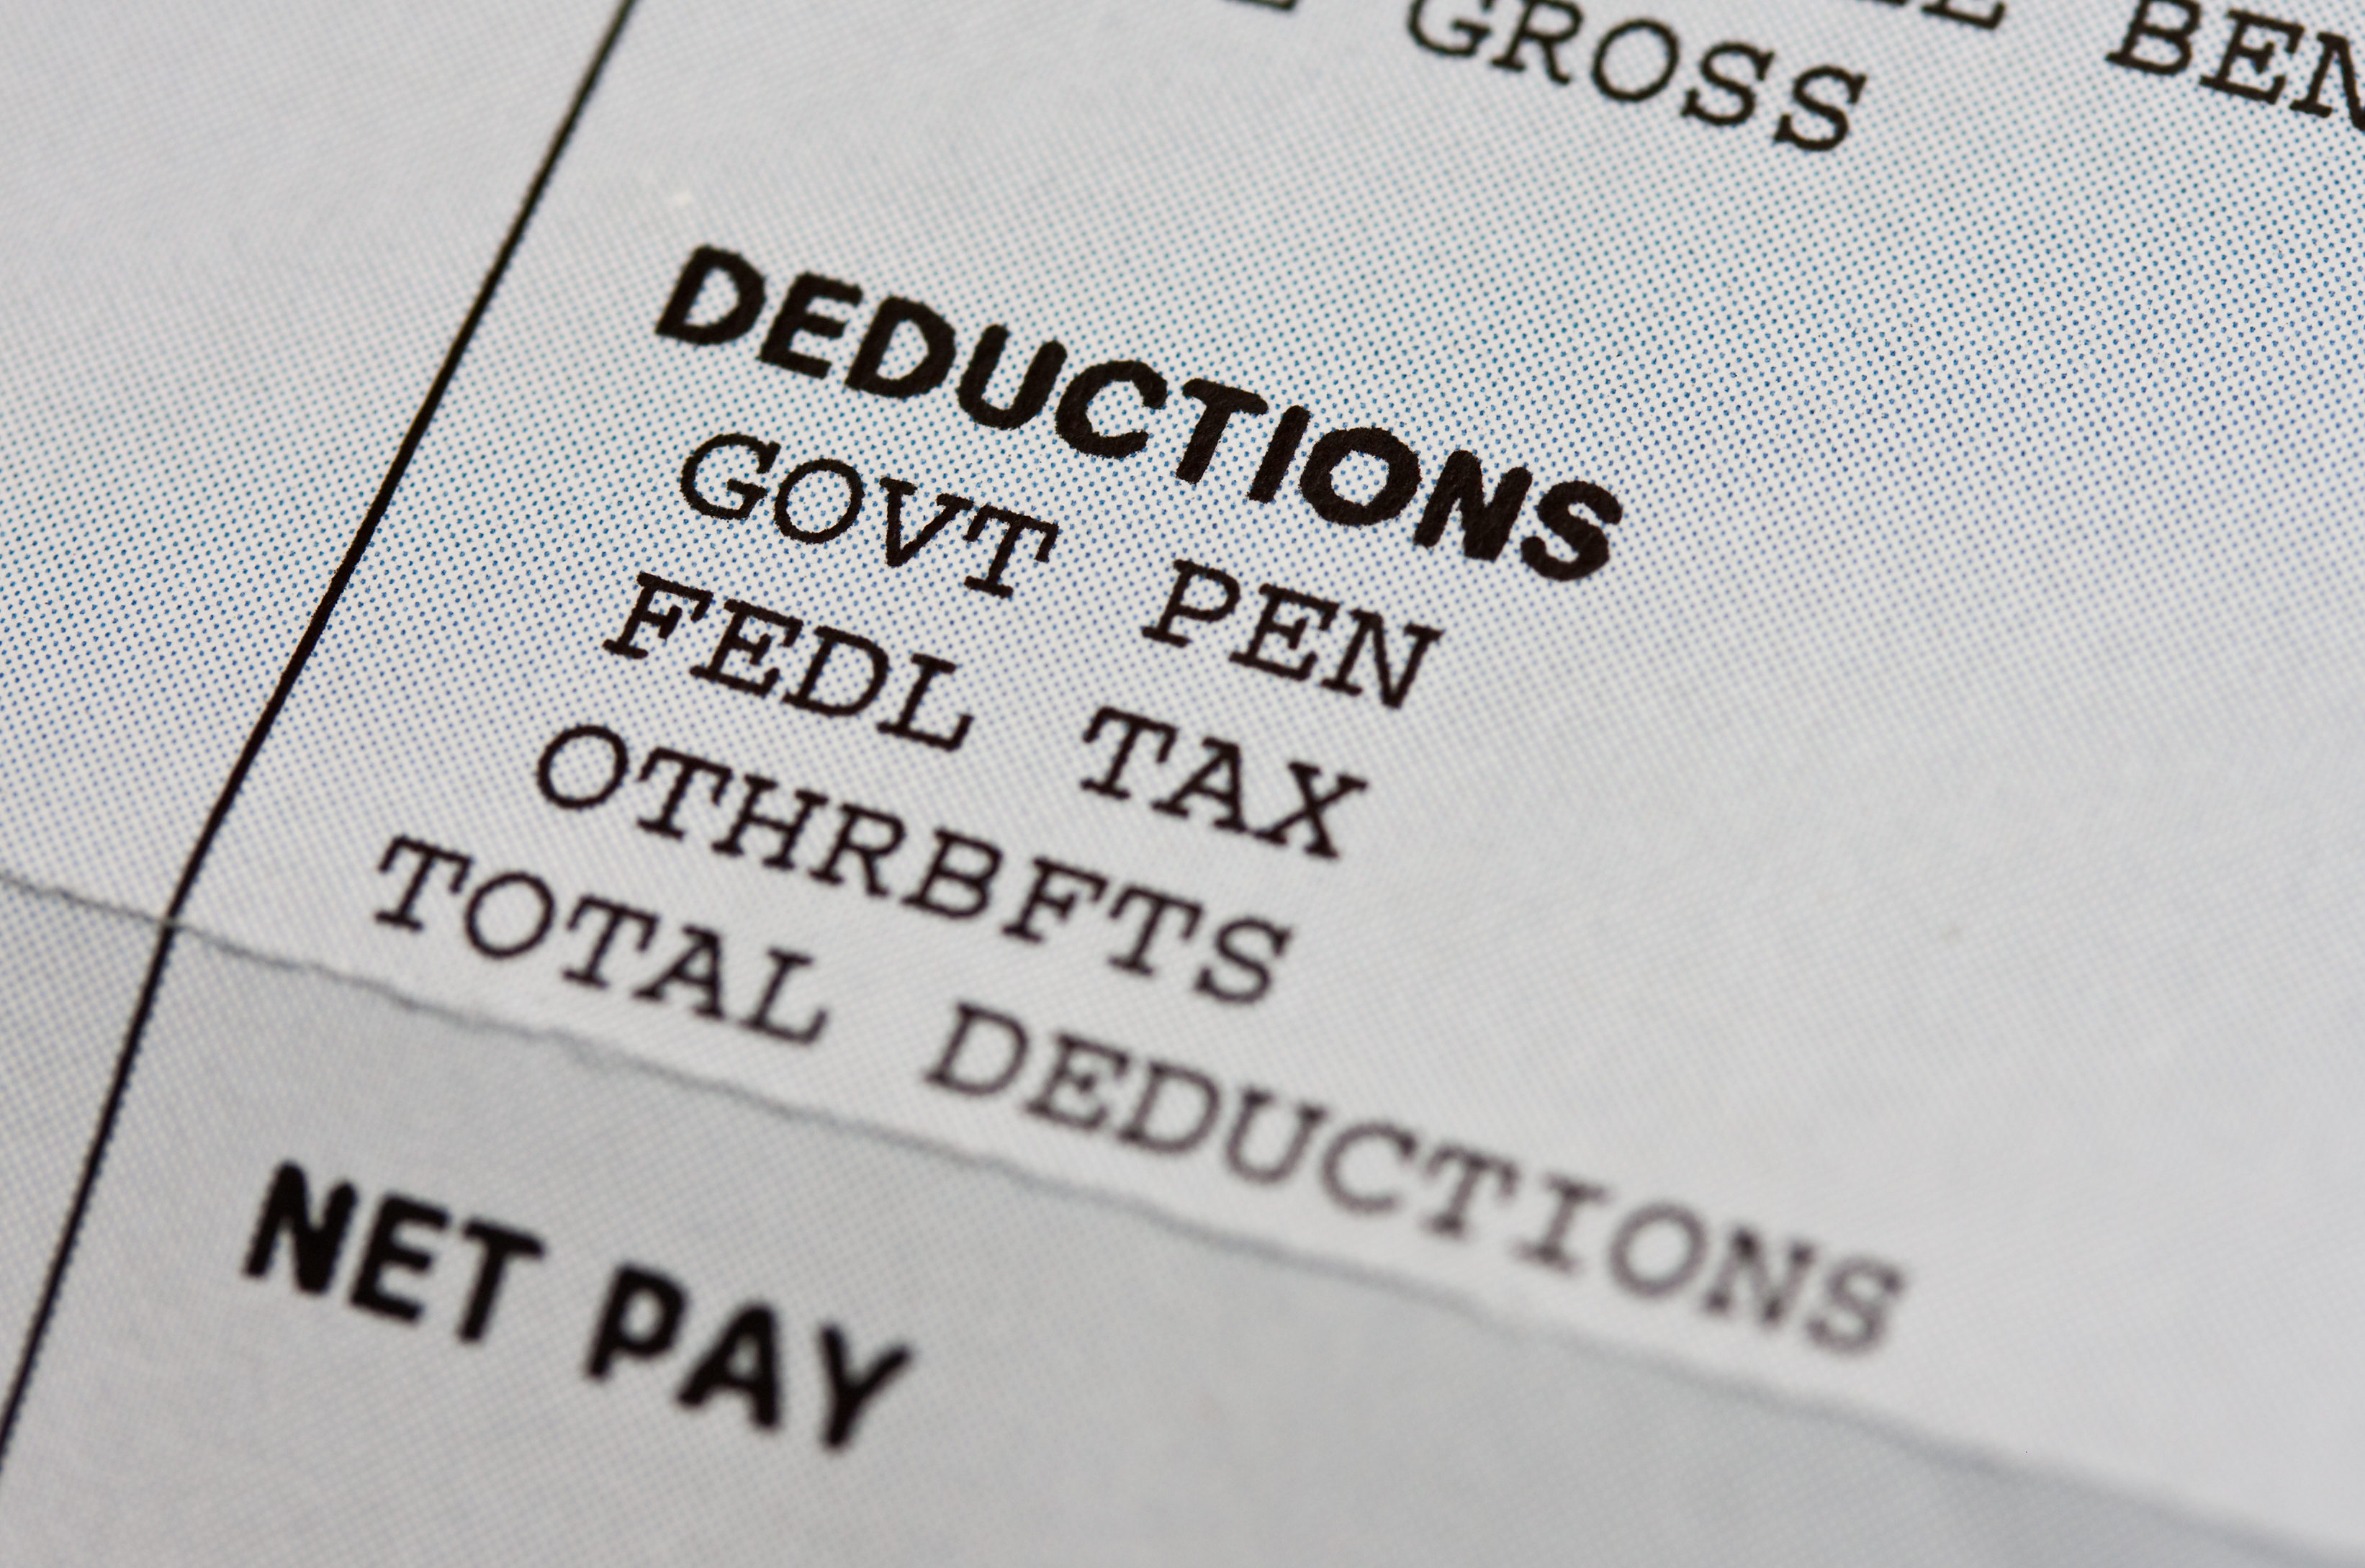 Close up of Payroll deductions on pay stub